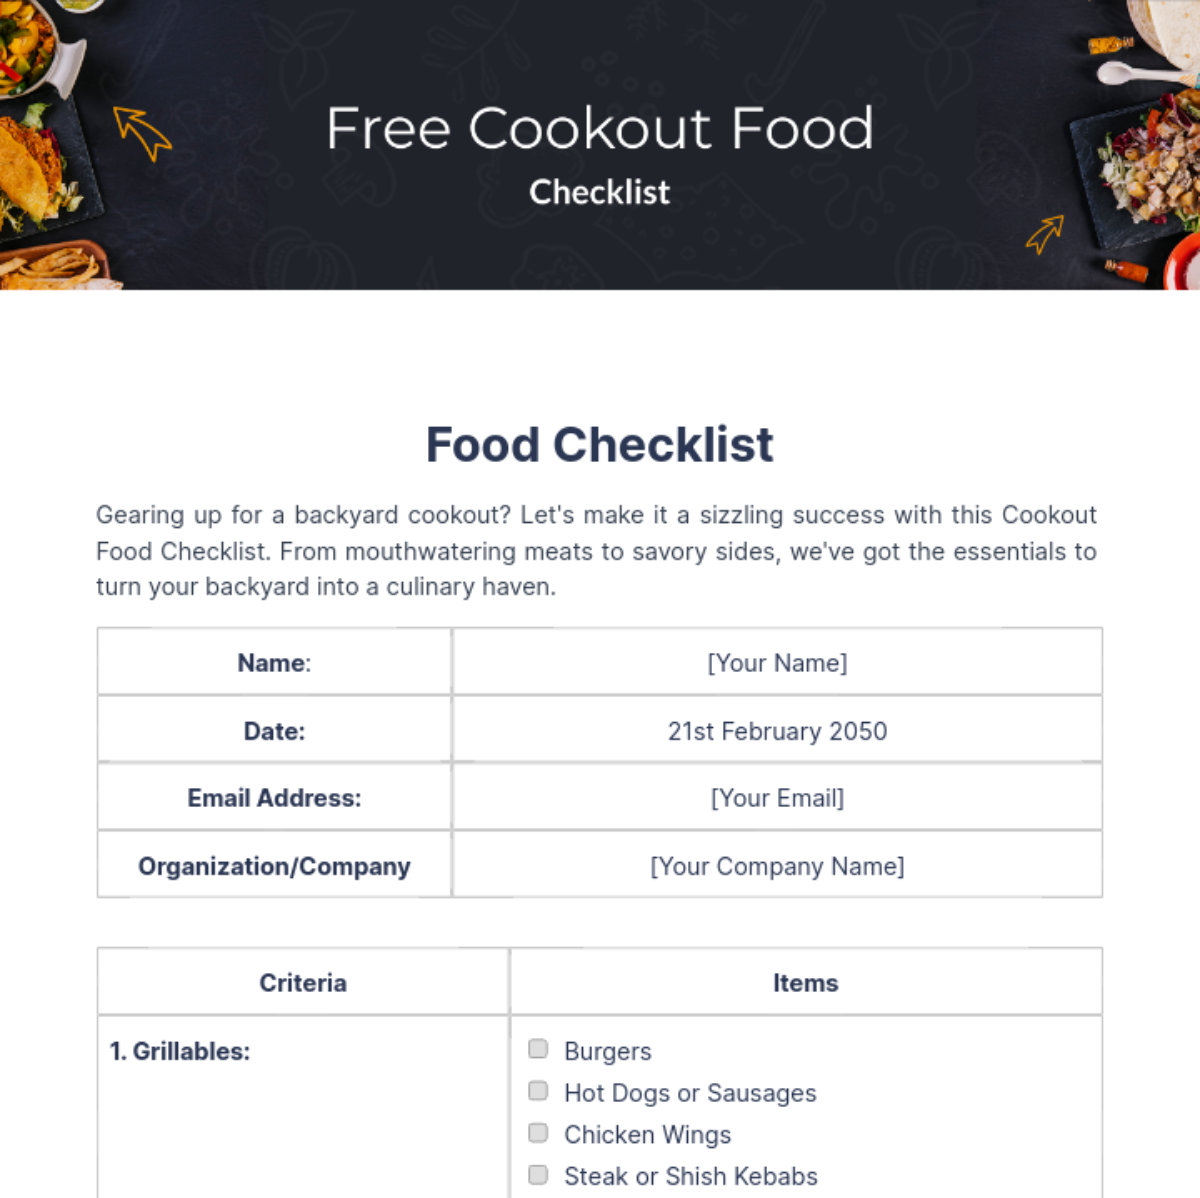 Free Cookout Food Checklist Template